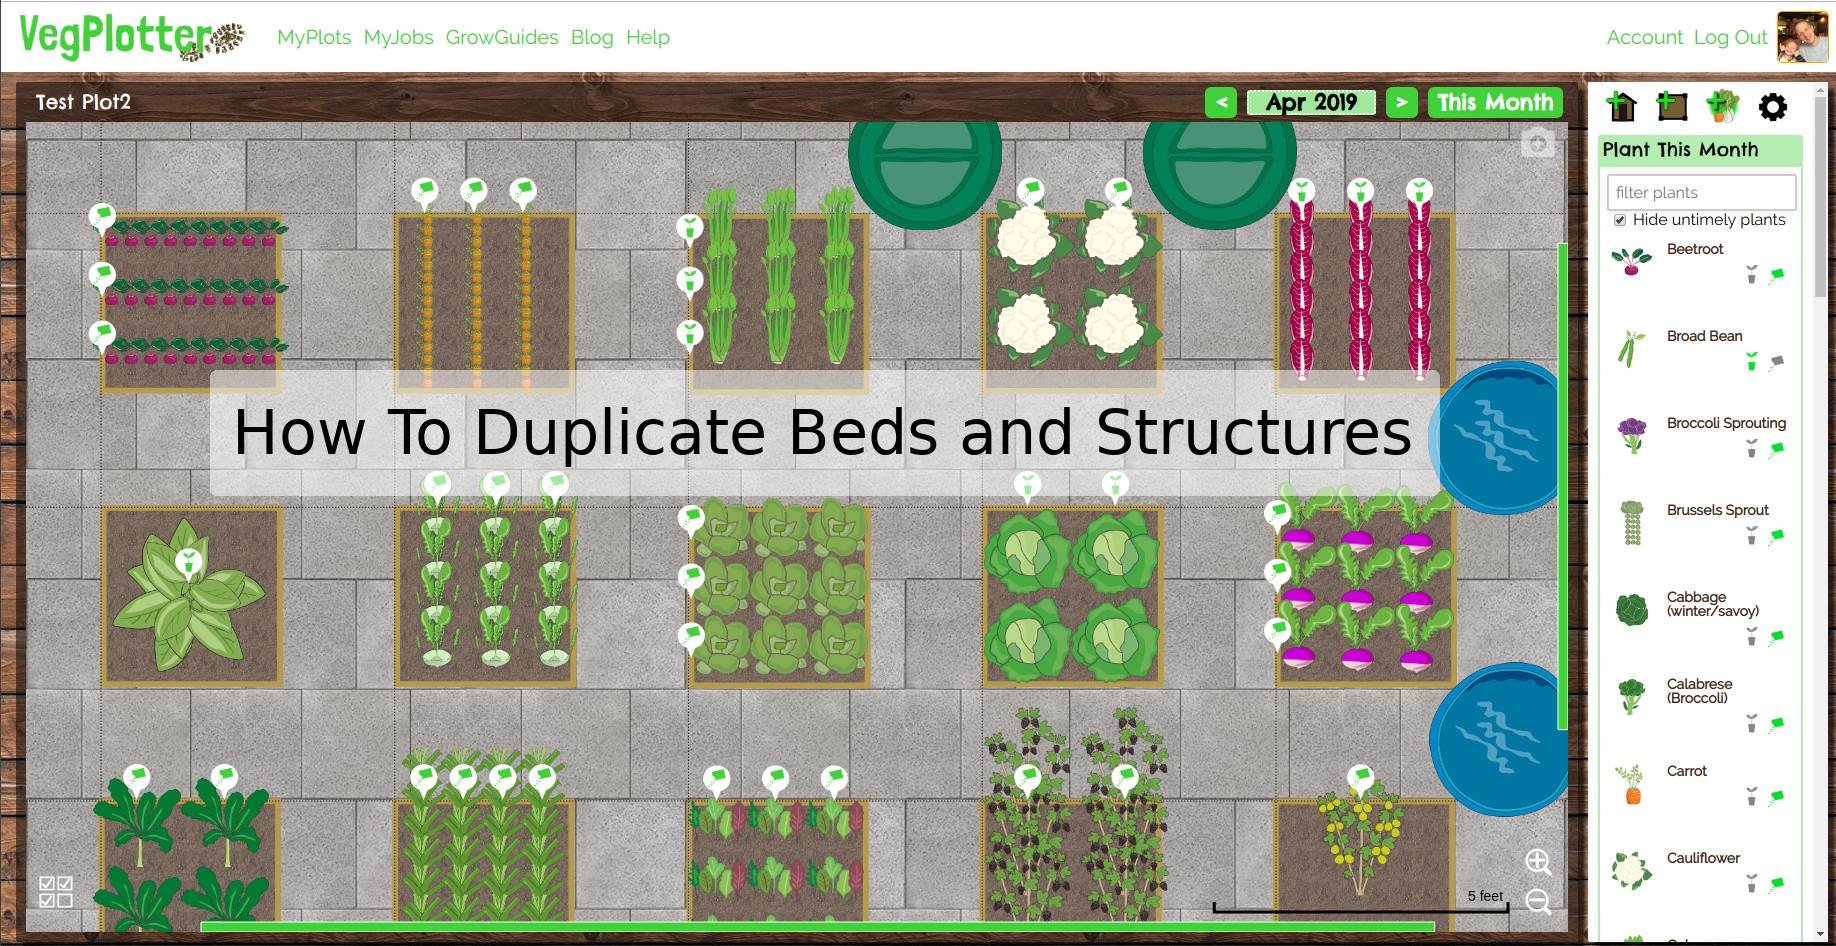 You can quickly design your vegetable garden using the duplicate feature of VegPlotter.